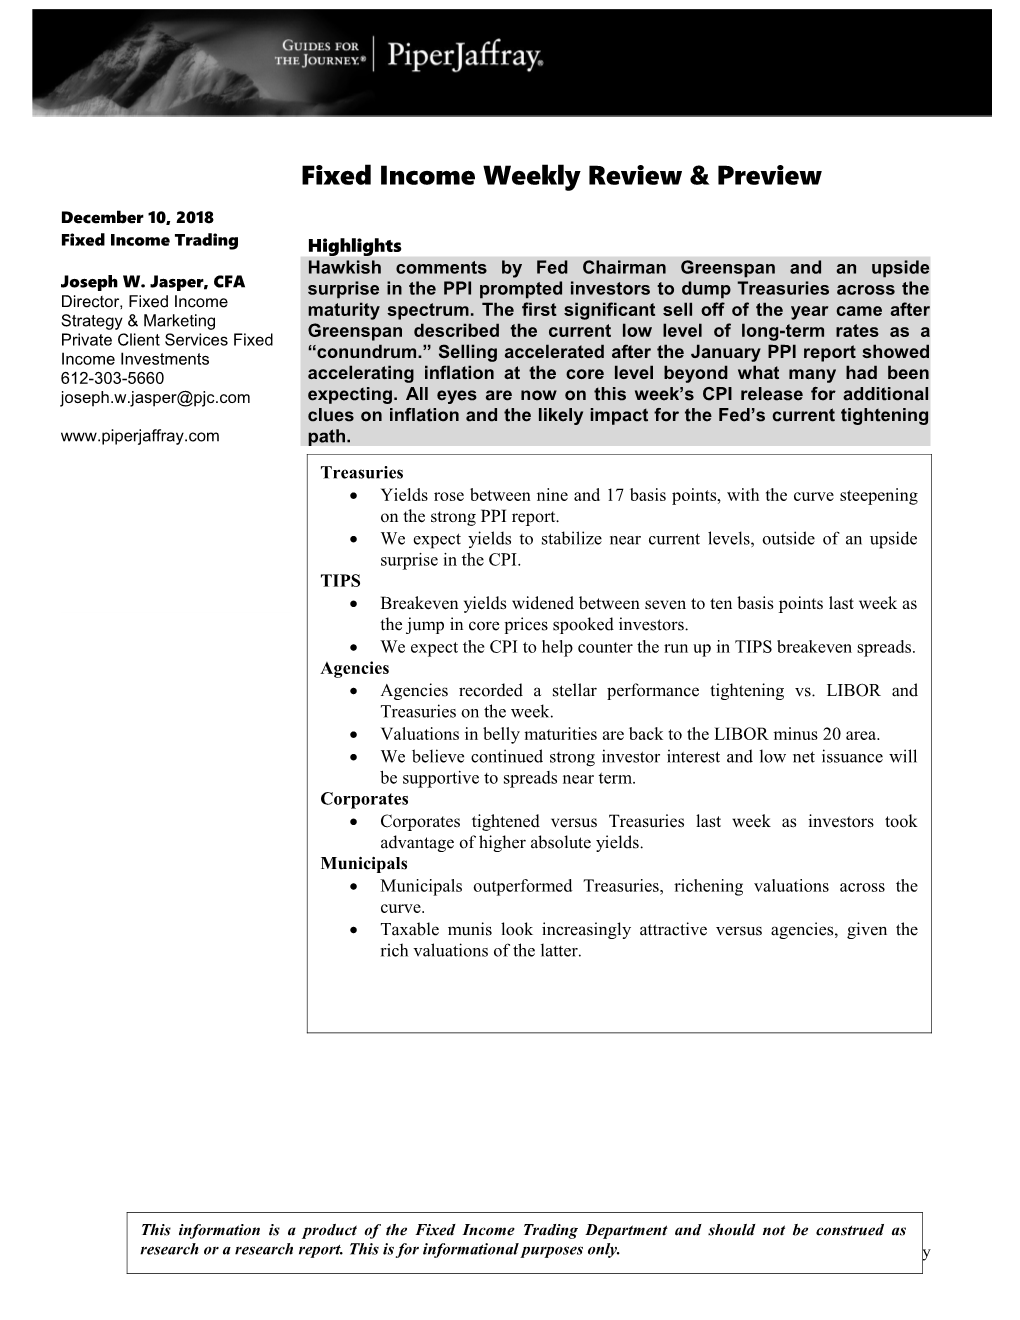 Fixed Income Weekly Review & Preview